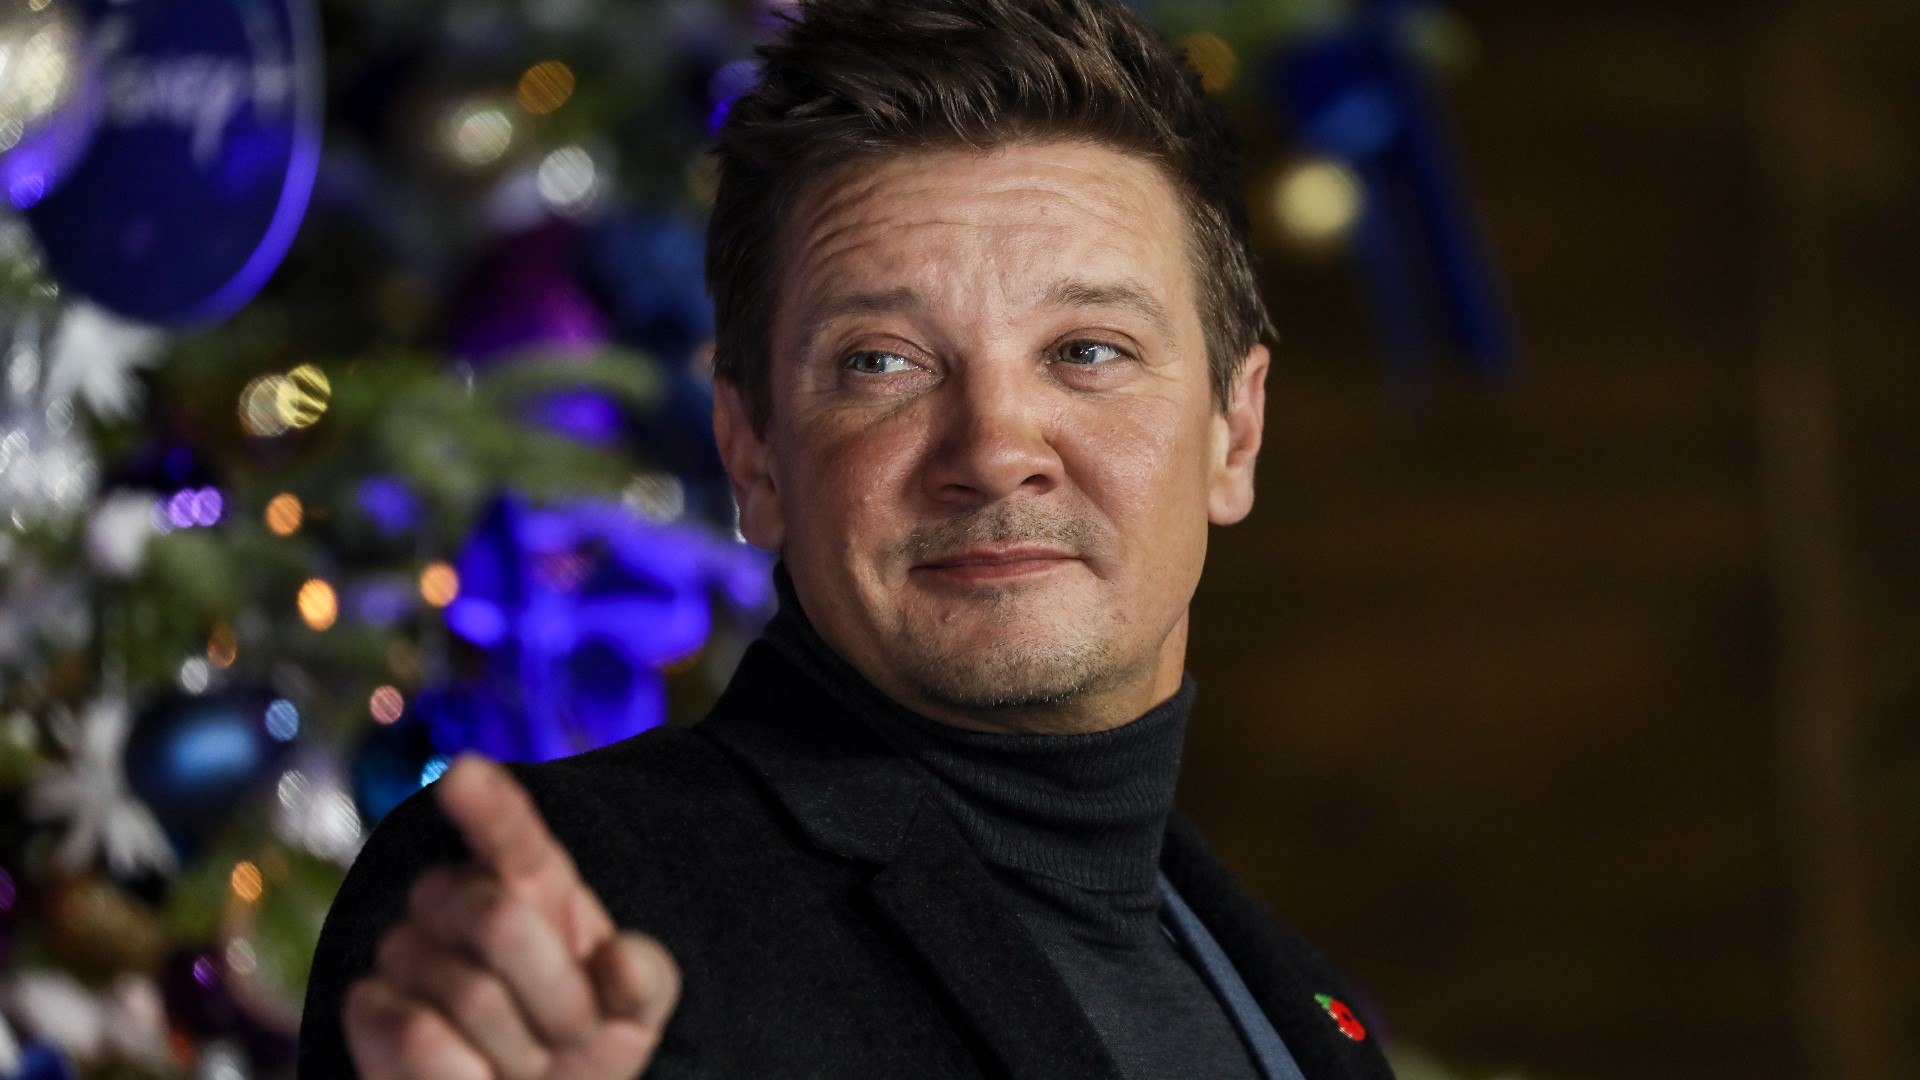 Jeremy Renner is now home from the hospital after his snowplow accident.